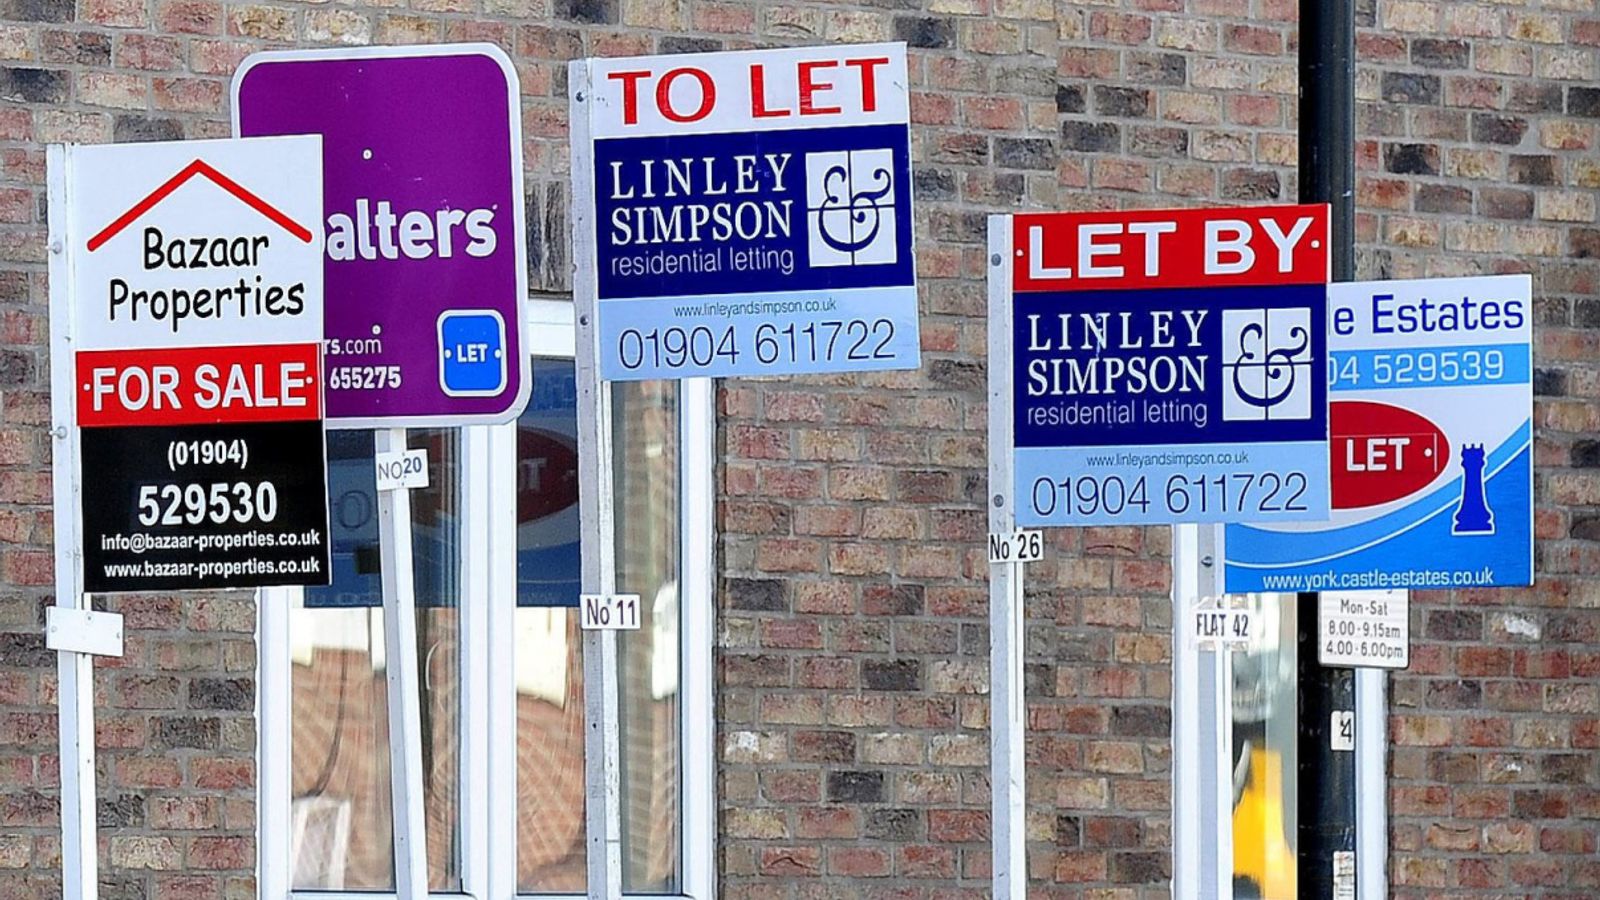 UK house prices record first annual fall in over a decade amid economic downturn